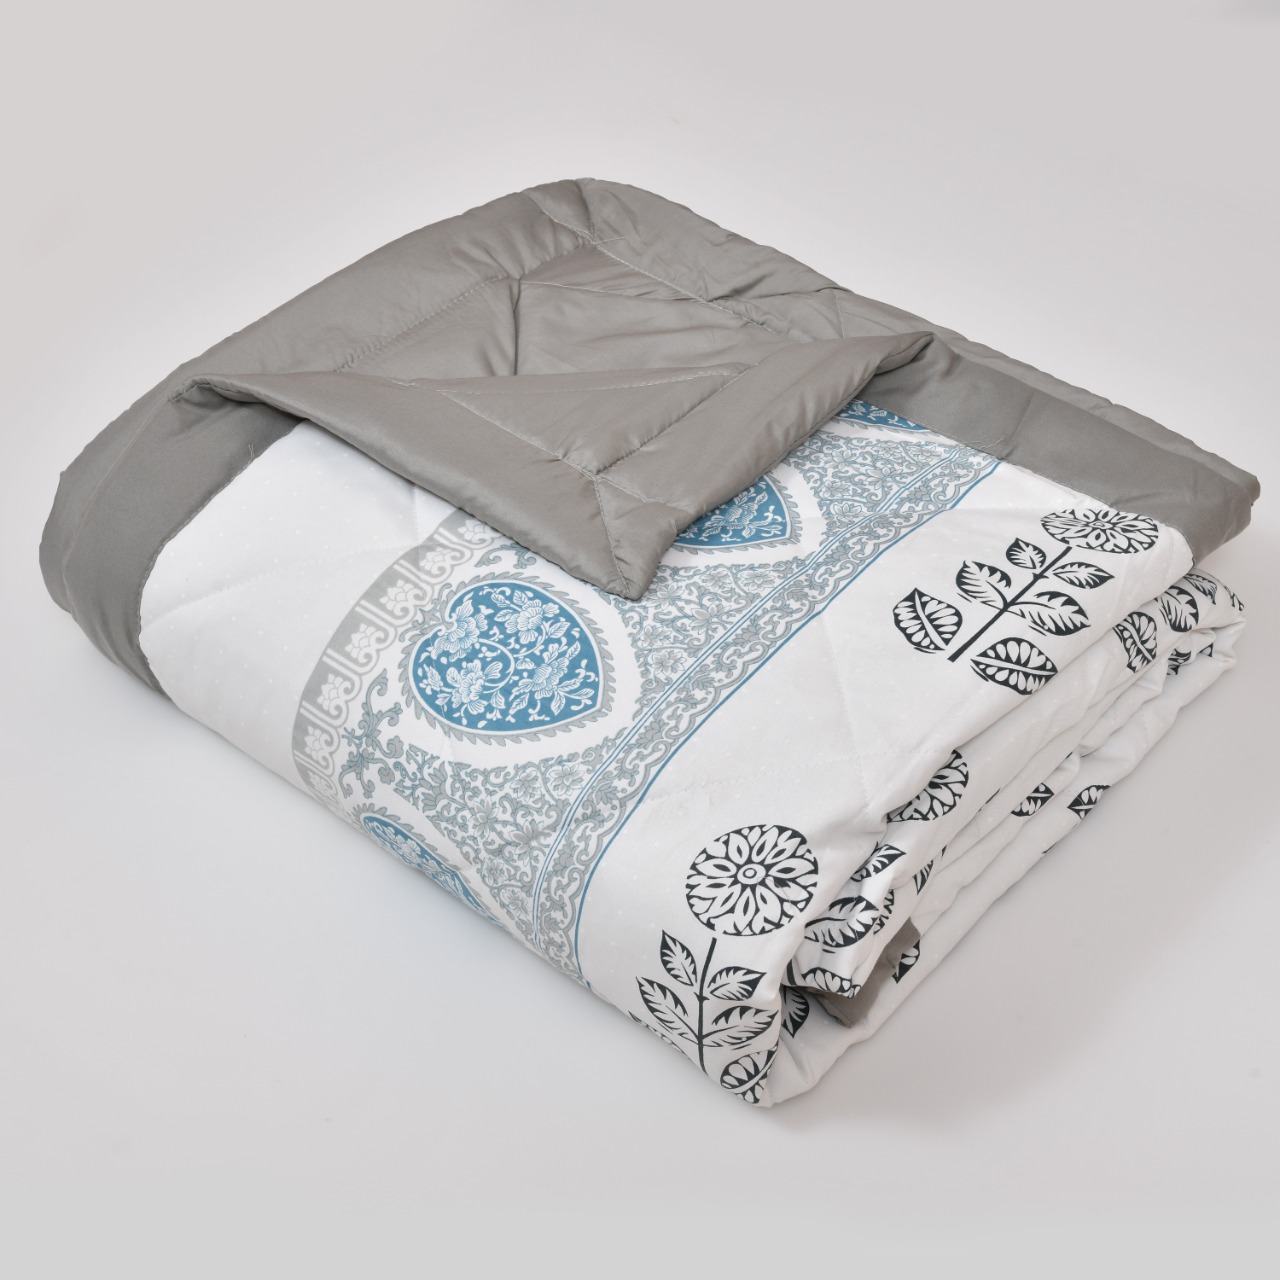 Floral Print Grey Cotton Quilted Bedcover Comforter Blanket